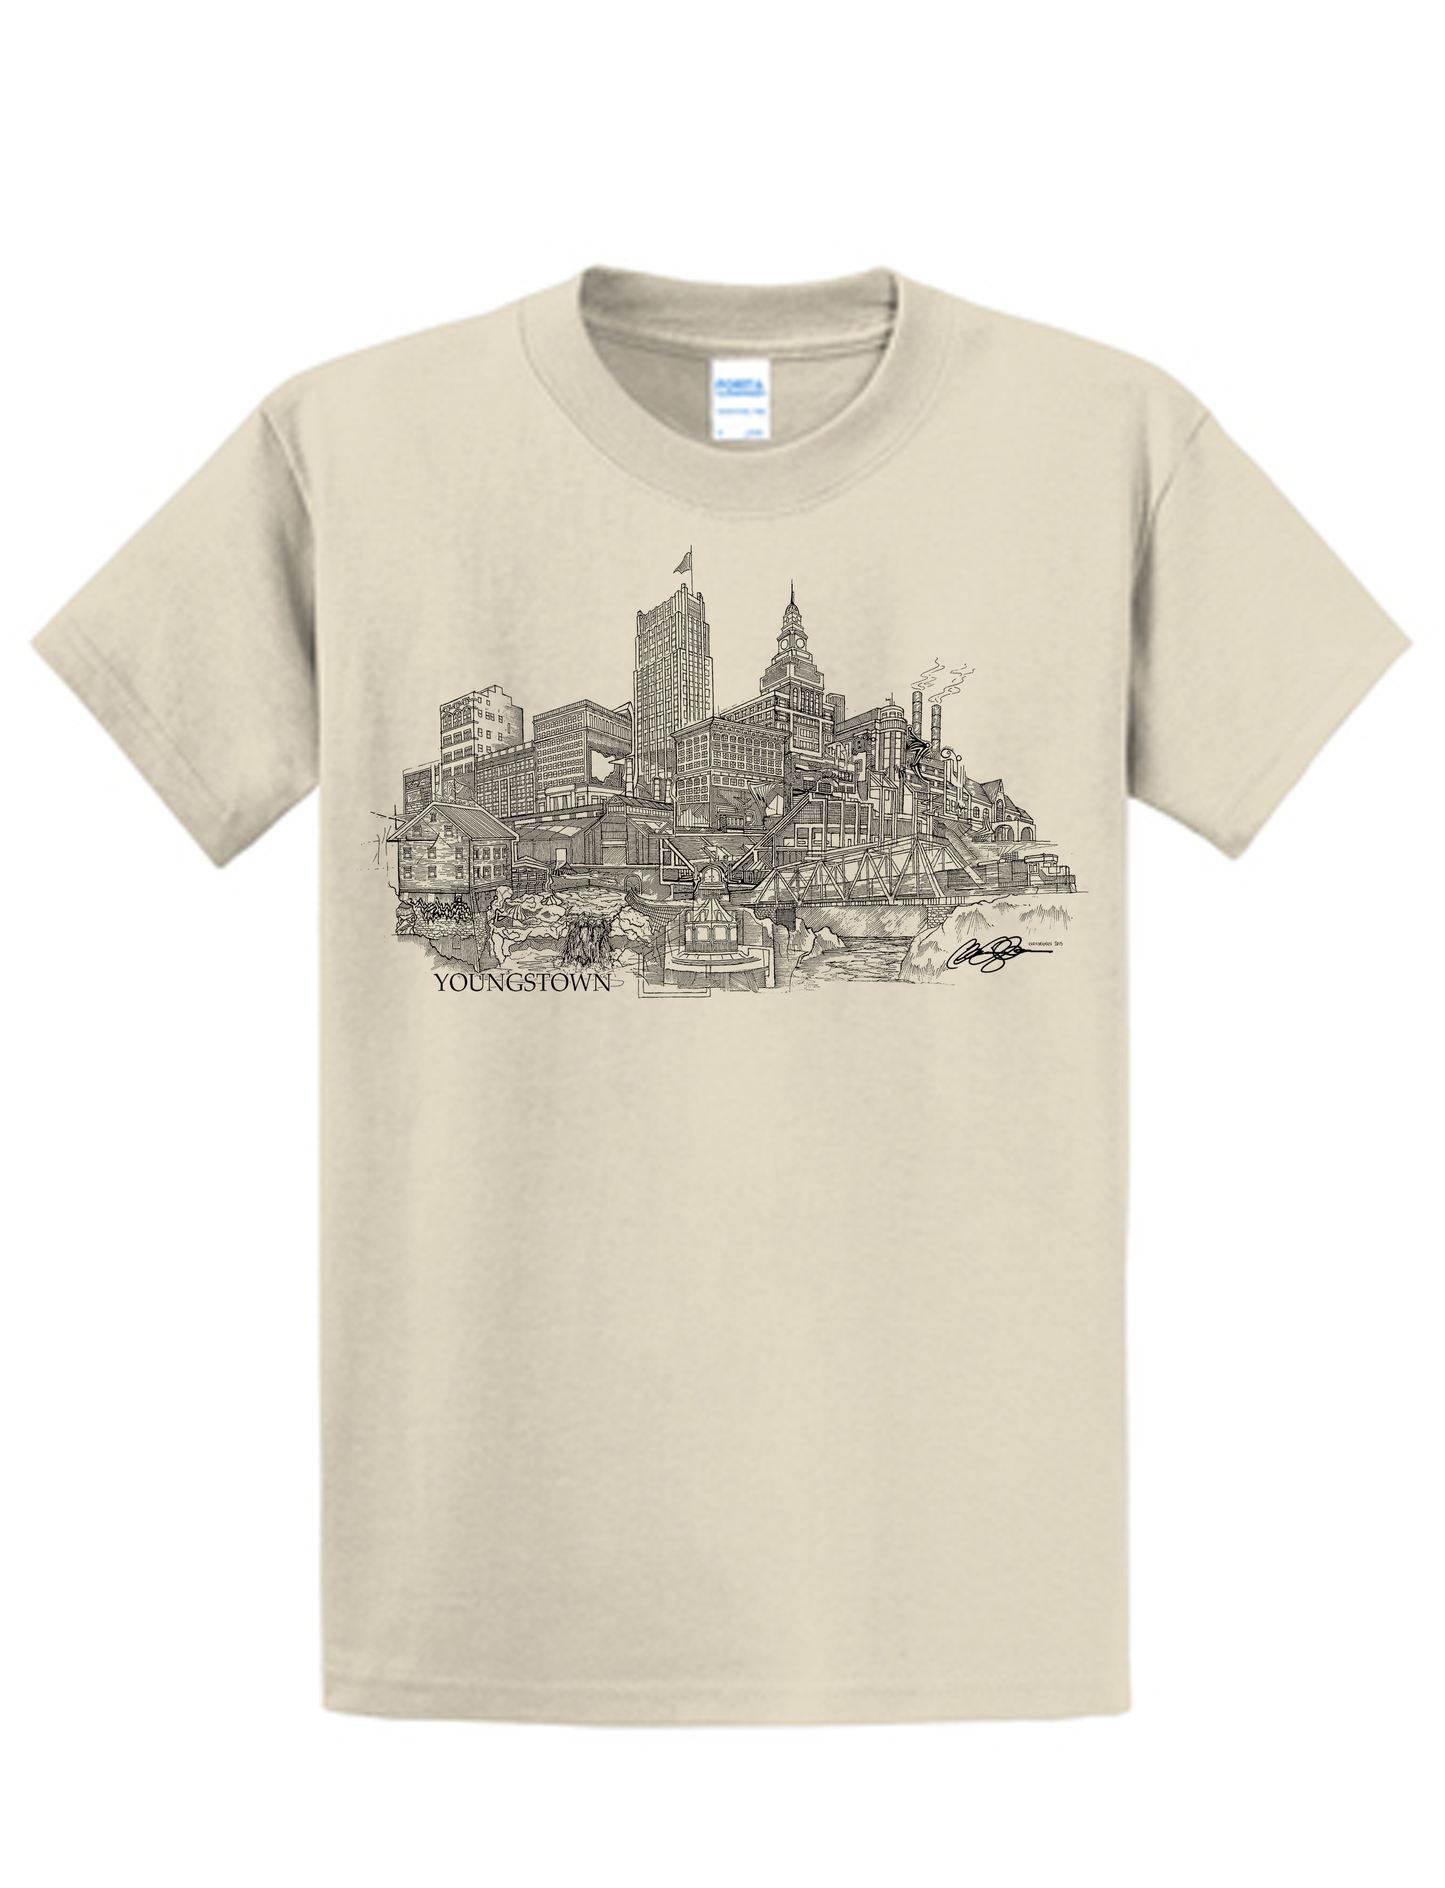 Youngstown T-Shirt Heather Grey